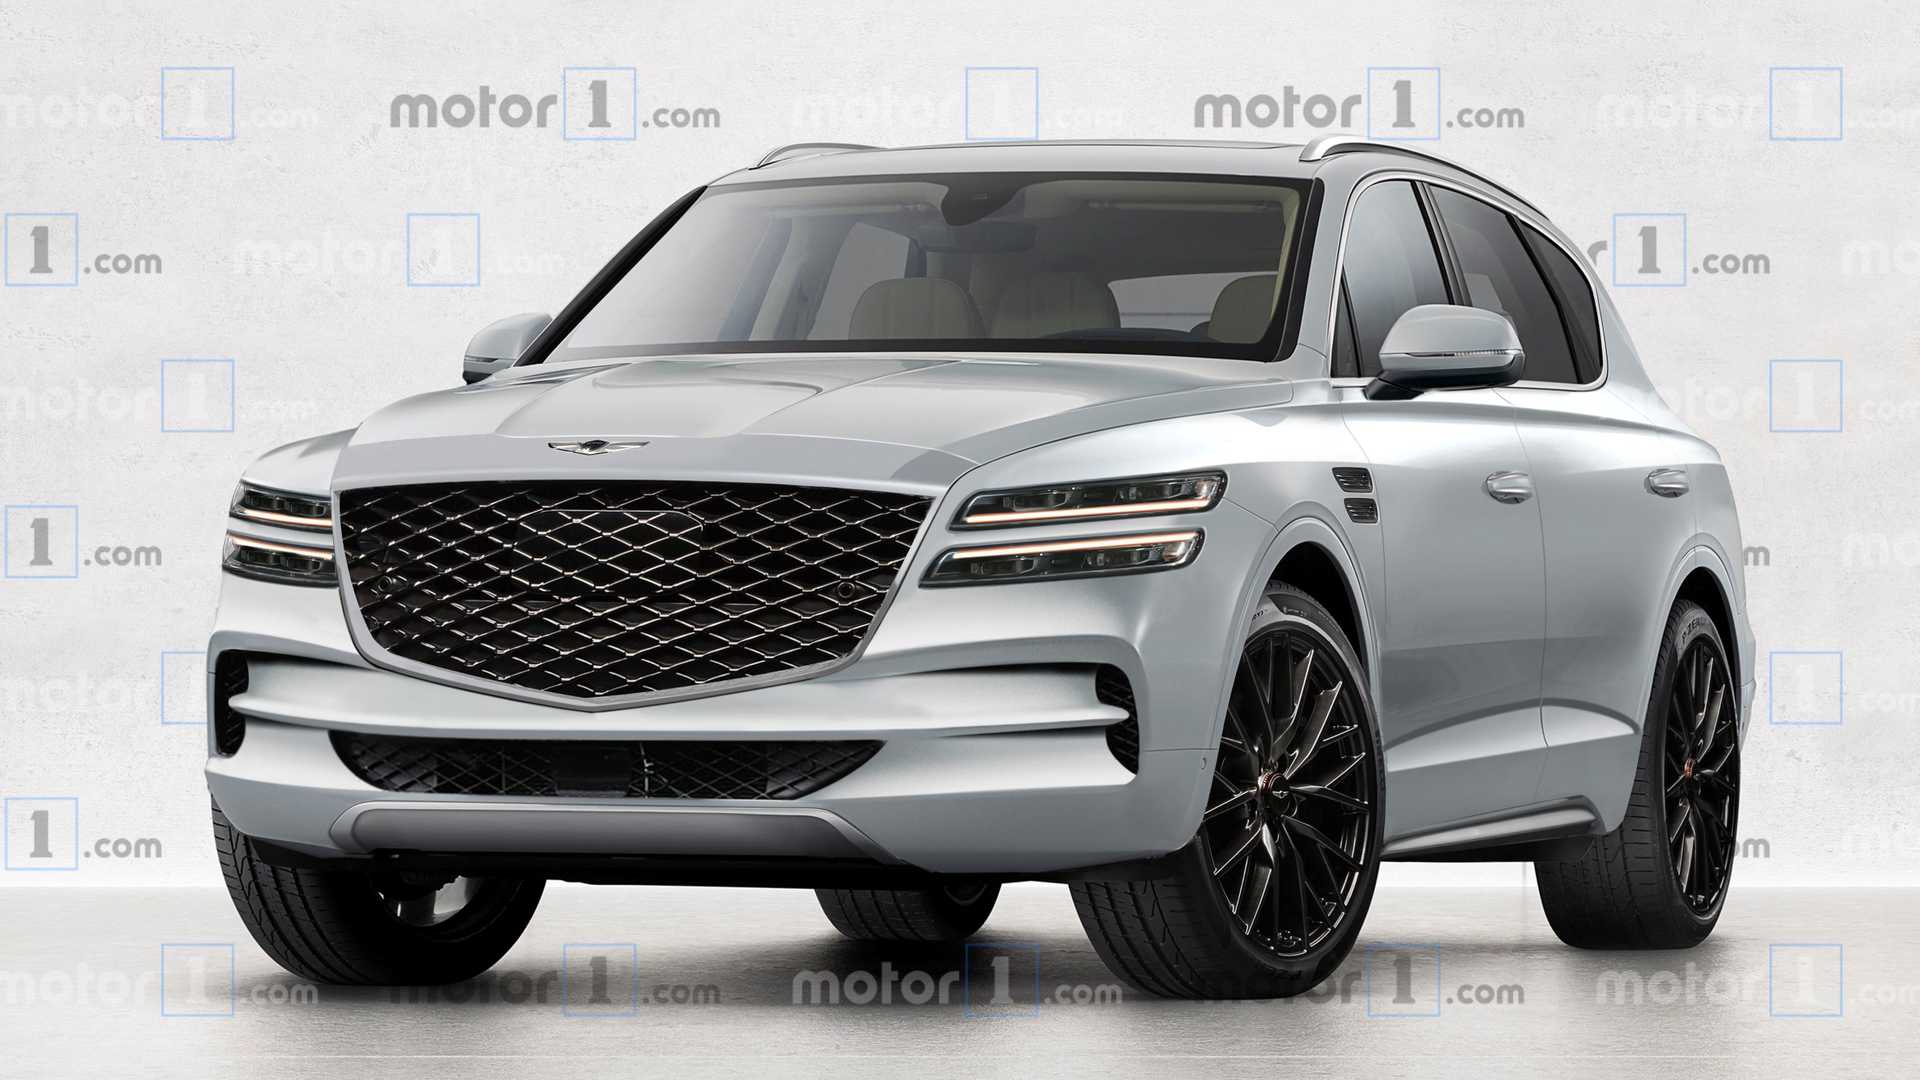 Genesis GV80 Leaked Image Suggest SUV Reveal Could Be Nigh